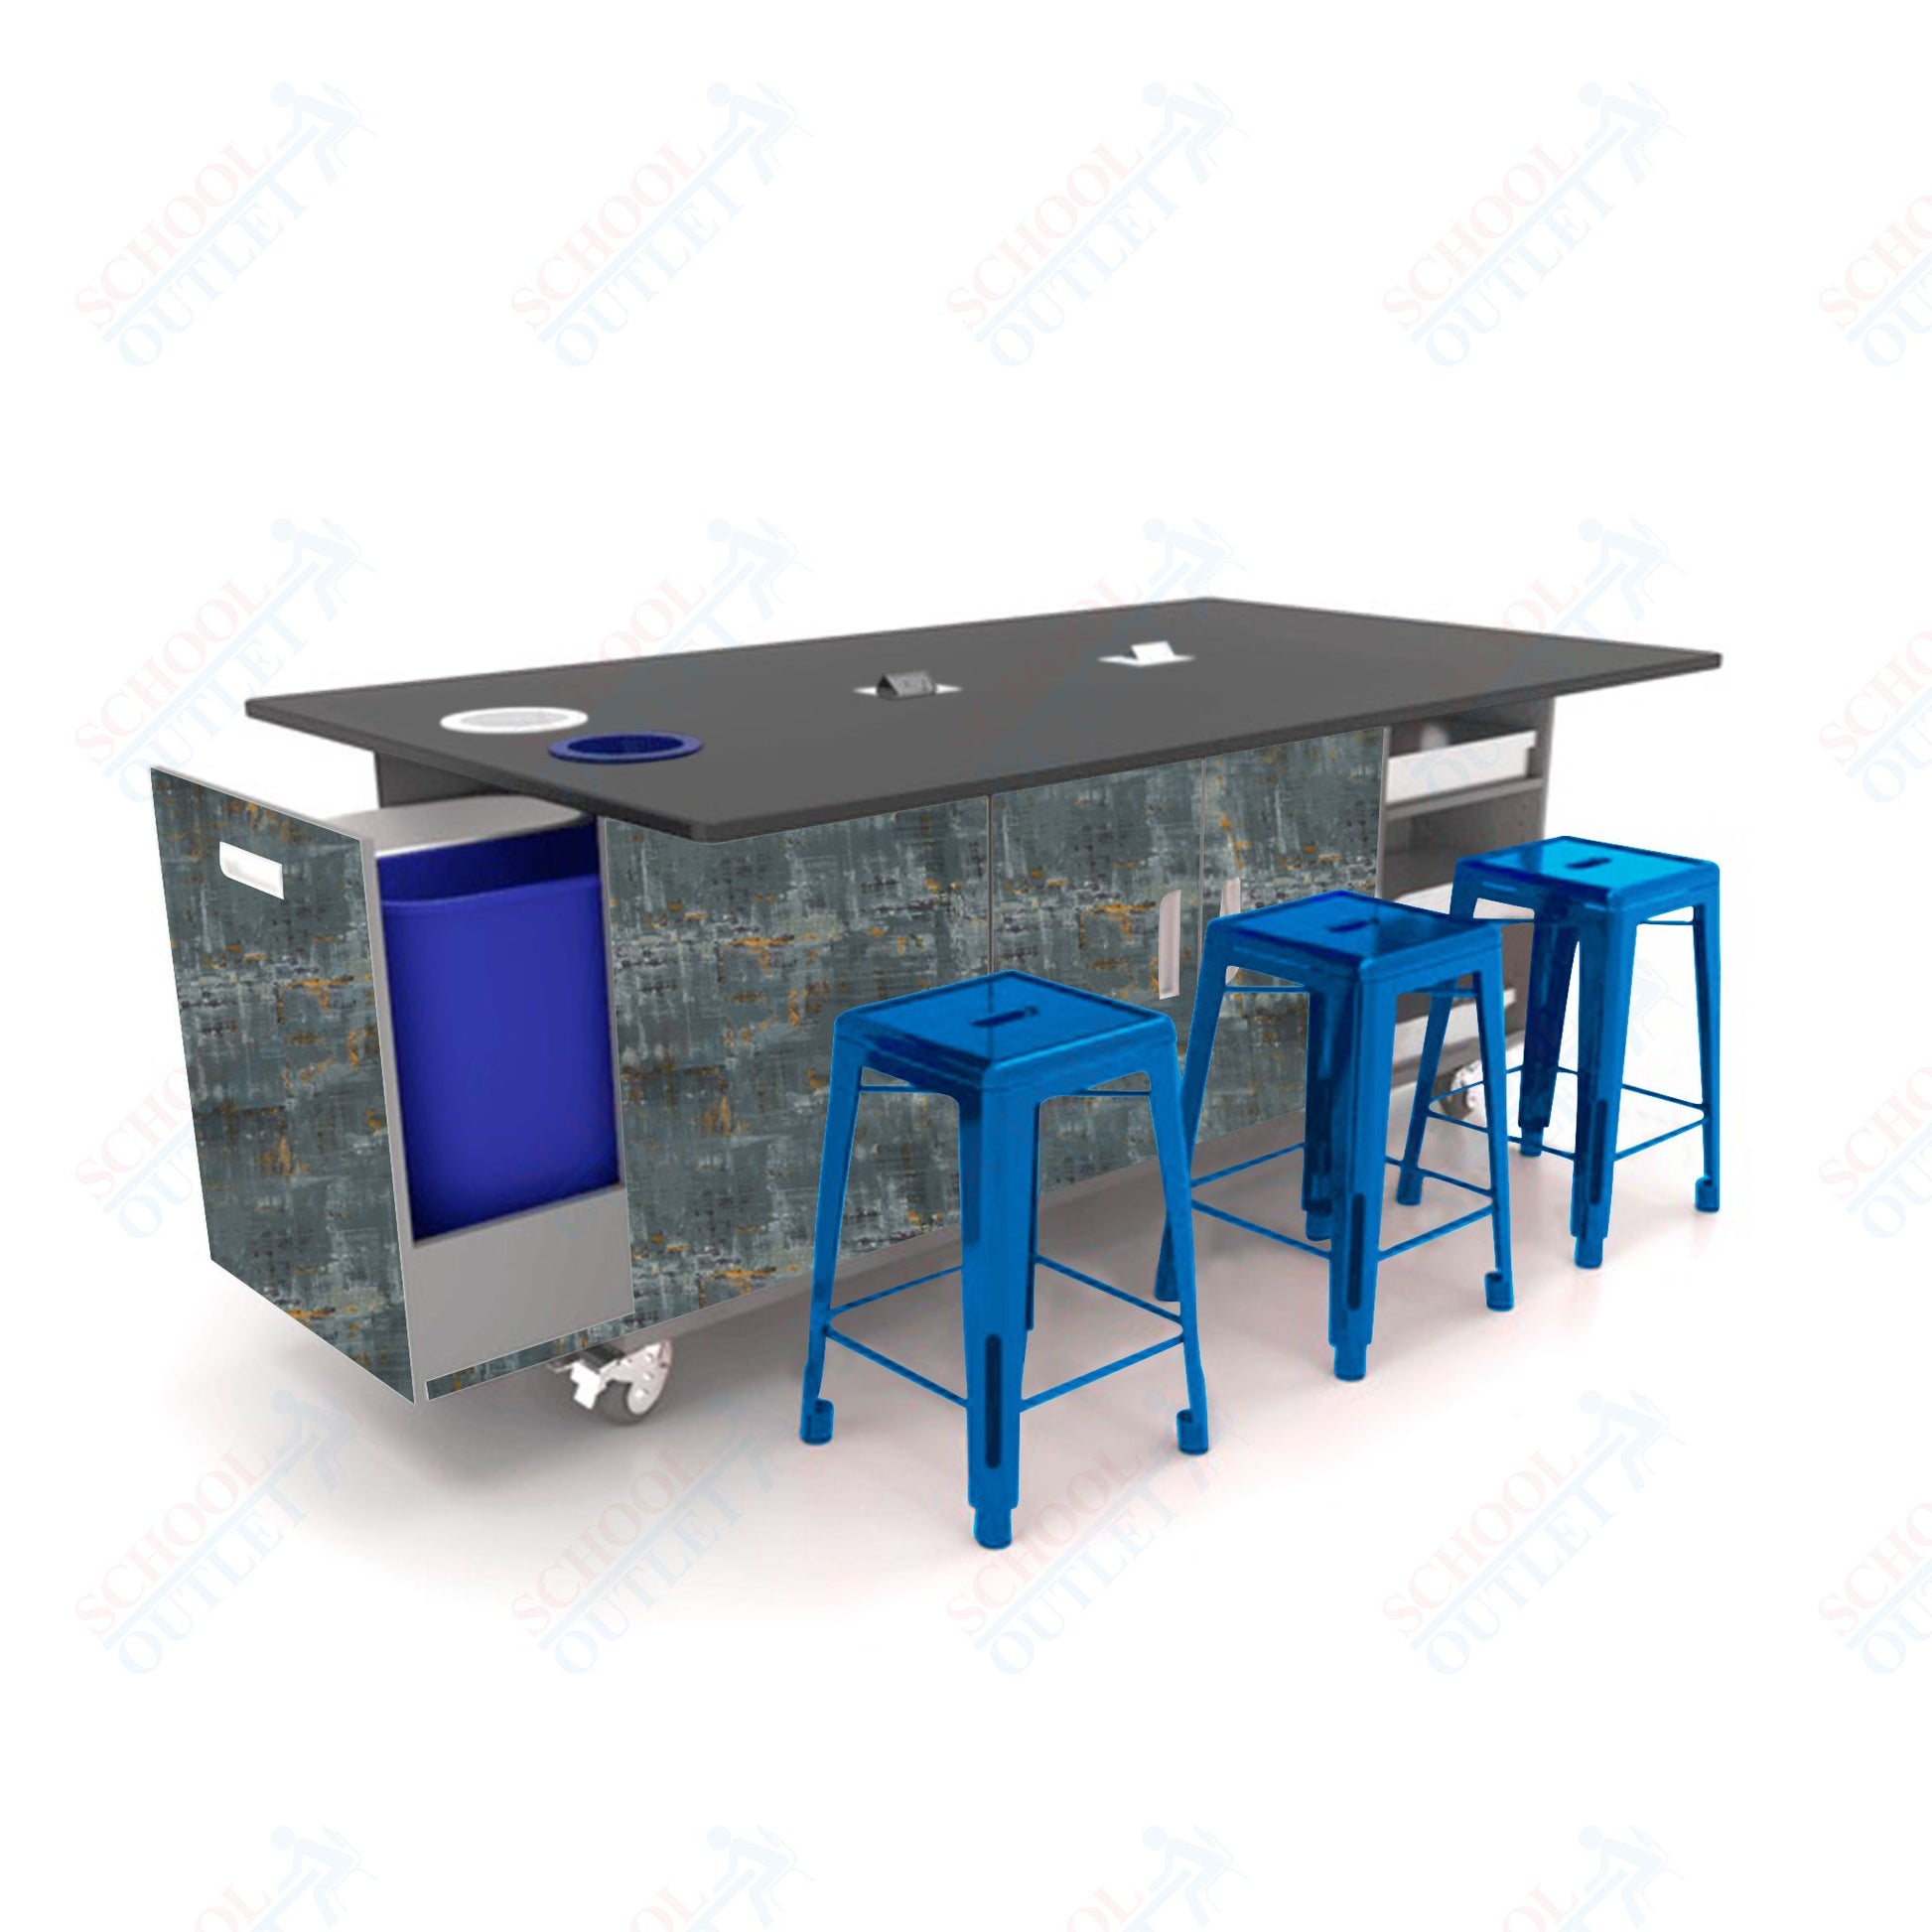 CEF ED Original Table 42"H Tough Top, Laminate Base with 6 Stools, Storage Bins, Trash Bins, and Electrical Outlets Included. - SchoolOutlet